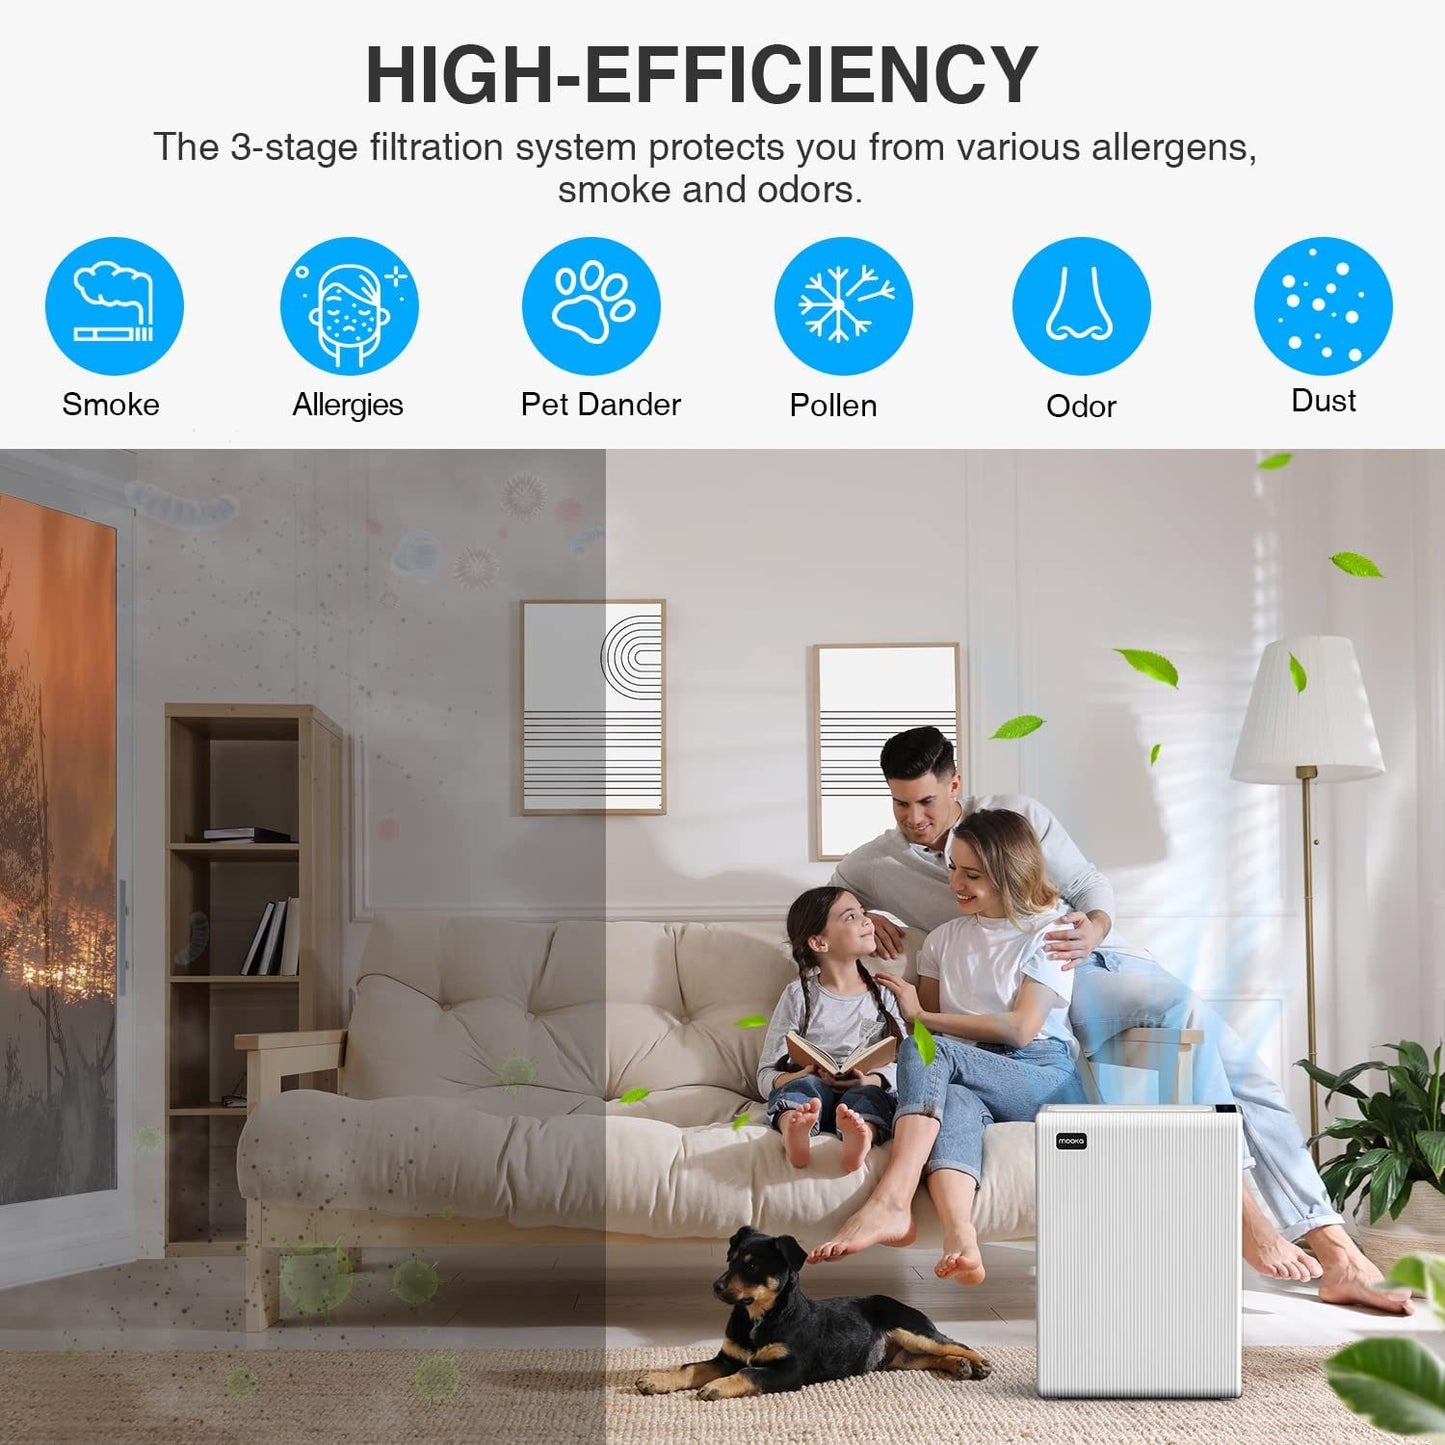 (Do not sold on Amazon)Air Purifiers for Home Large Room up to 969ft², H13 HEPA Air Filter for Pets Hair Dander Smoke Pollen Dust, Ozone Free, Portable Air Purifiers for Bedroom Office Living Room